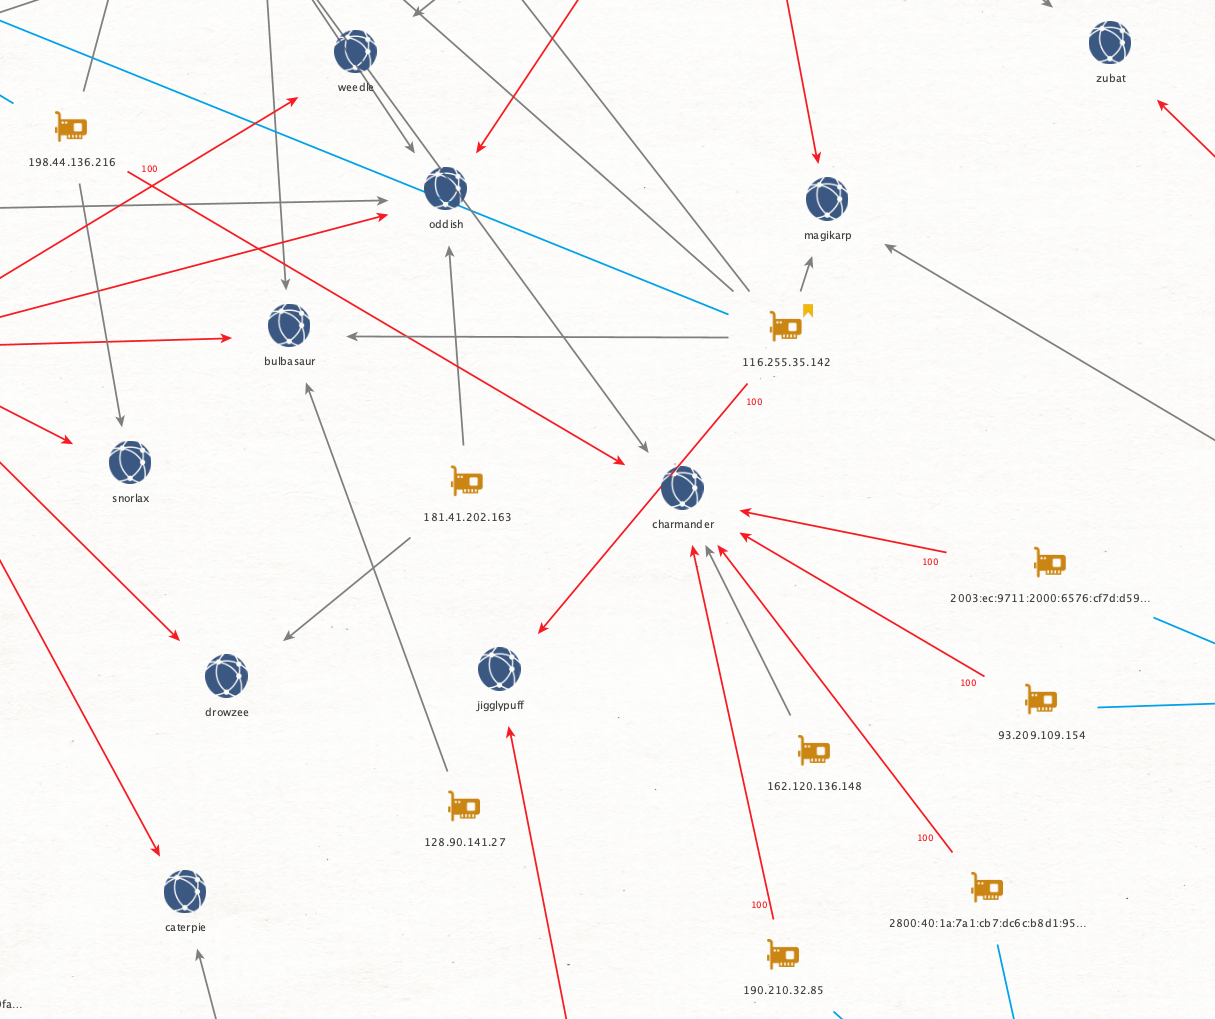 Image 6 is a diagram with many nodes. Red, blue and grey arrows connect the nodes from IP addresses to Pokemon. These include Weedle, Bulbasaur, Magikarp, Zubat, Snorlax, Drowzee, Caterpie, Jigglypuff and others.